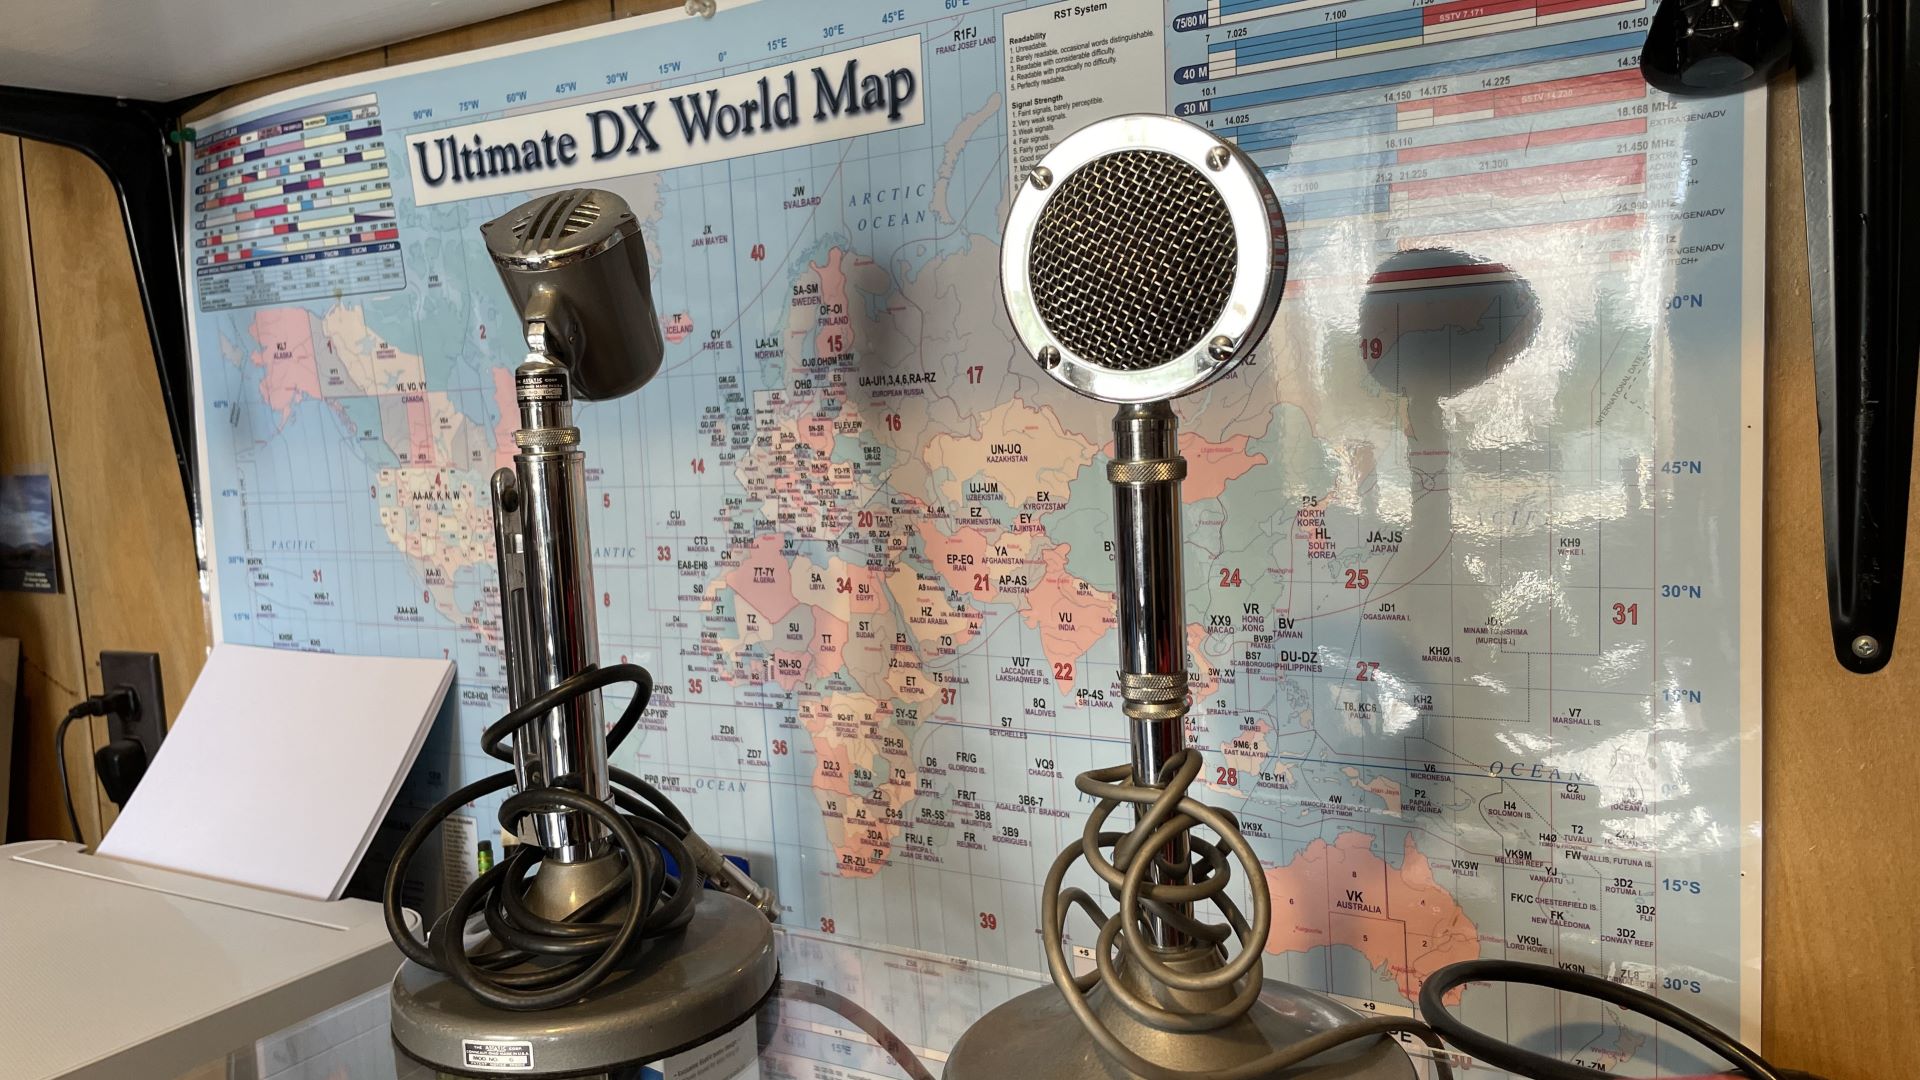 Two vintage microphones sit in front of a DX world map.